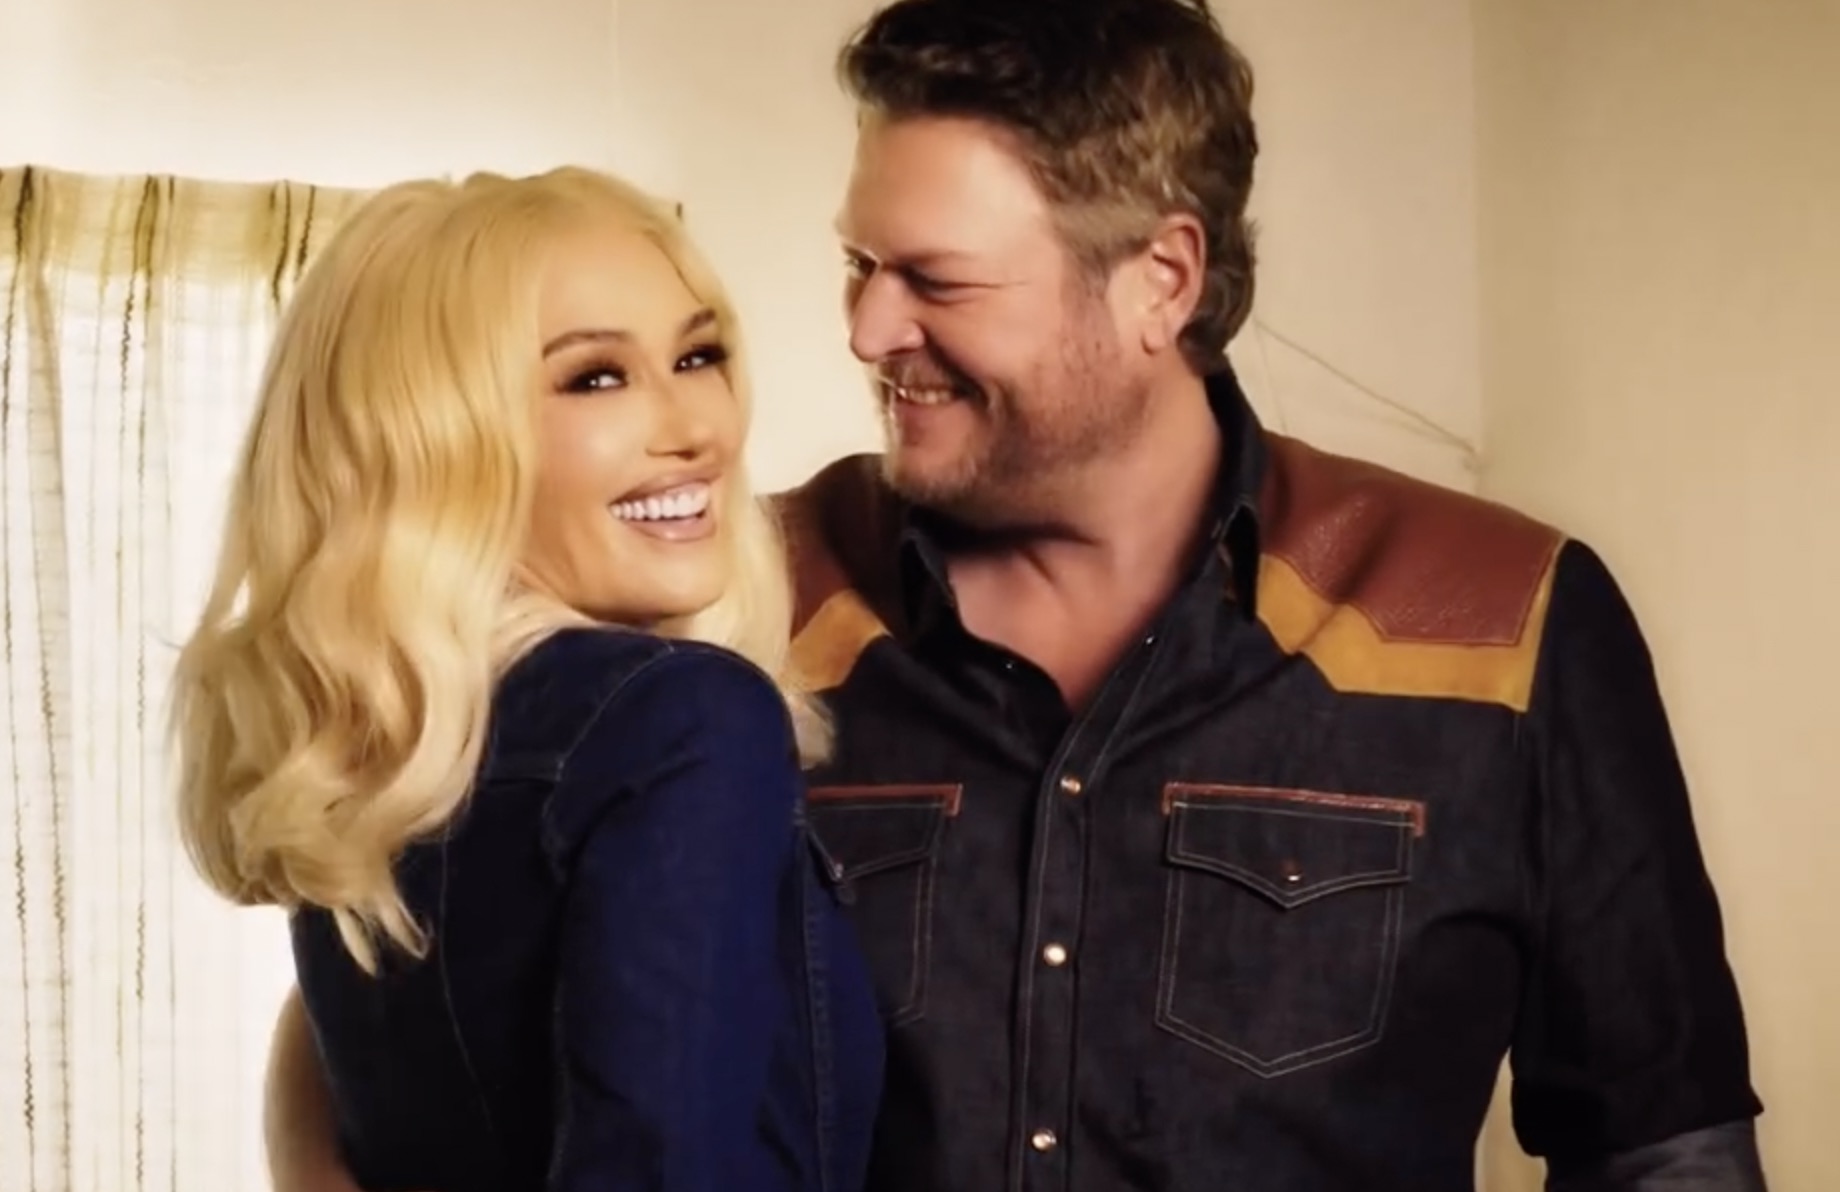 Gwen and Blake's new duet has been released ahead of Valentine's Day